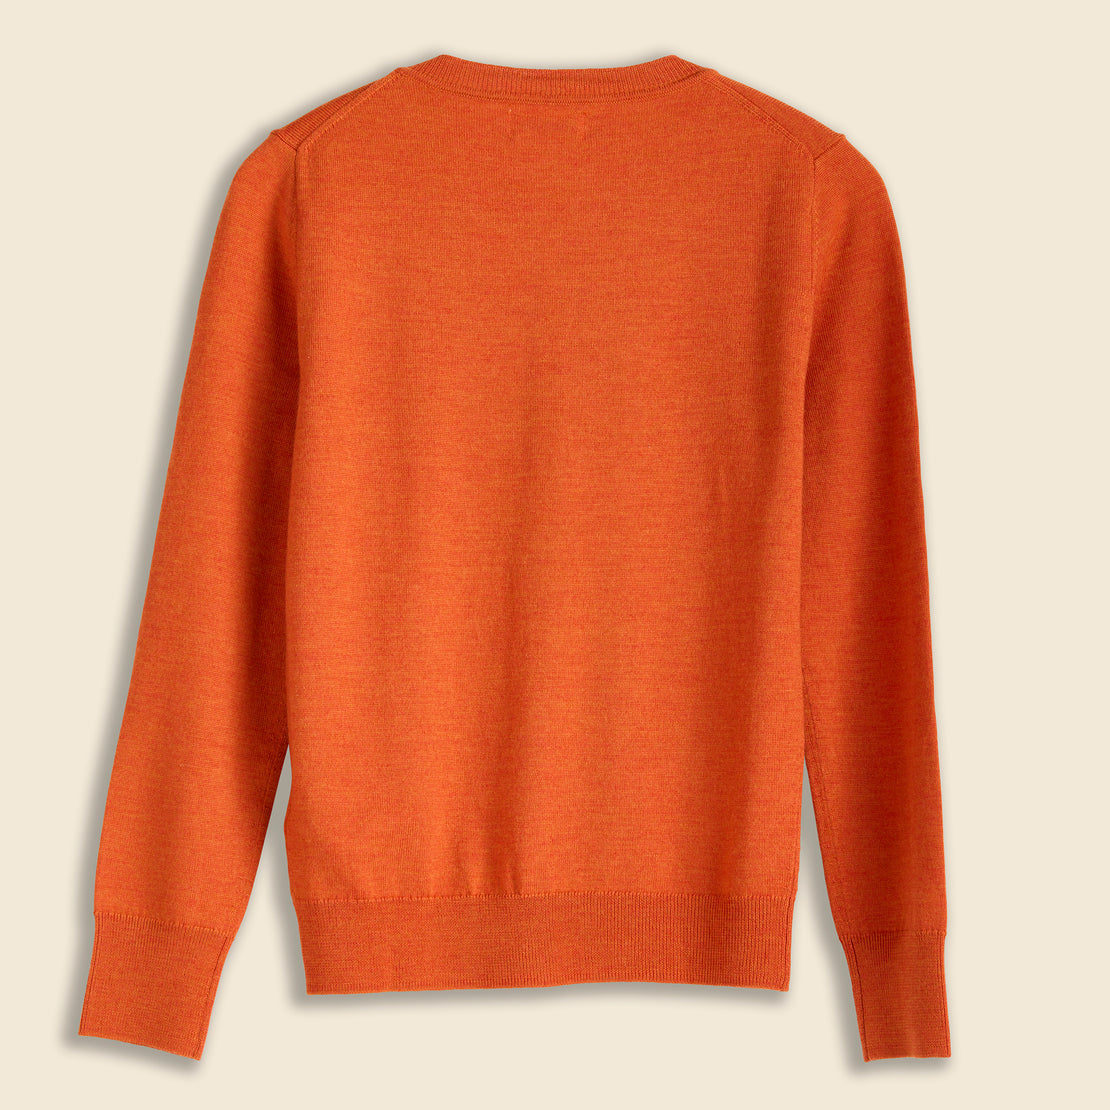 Relaxed Fit Cardigan - Orange - BEAMS BOY - STAG Provisions - W - Tops - Sweater